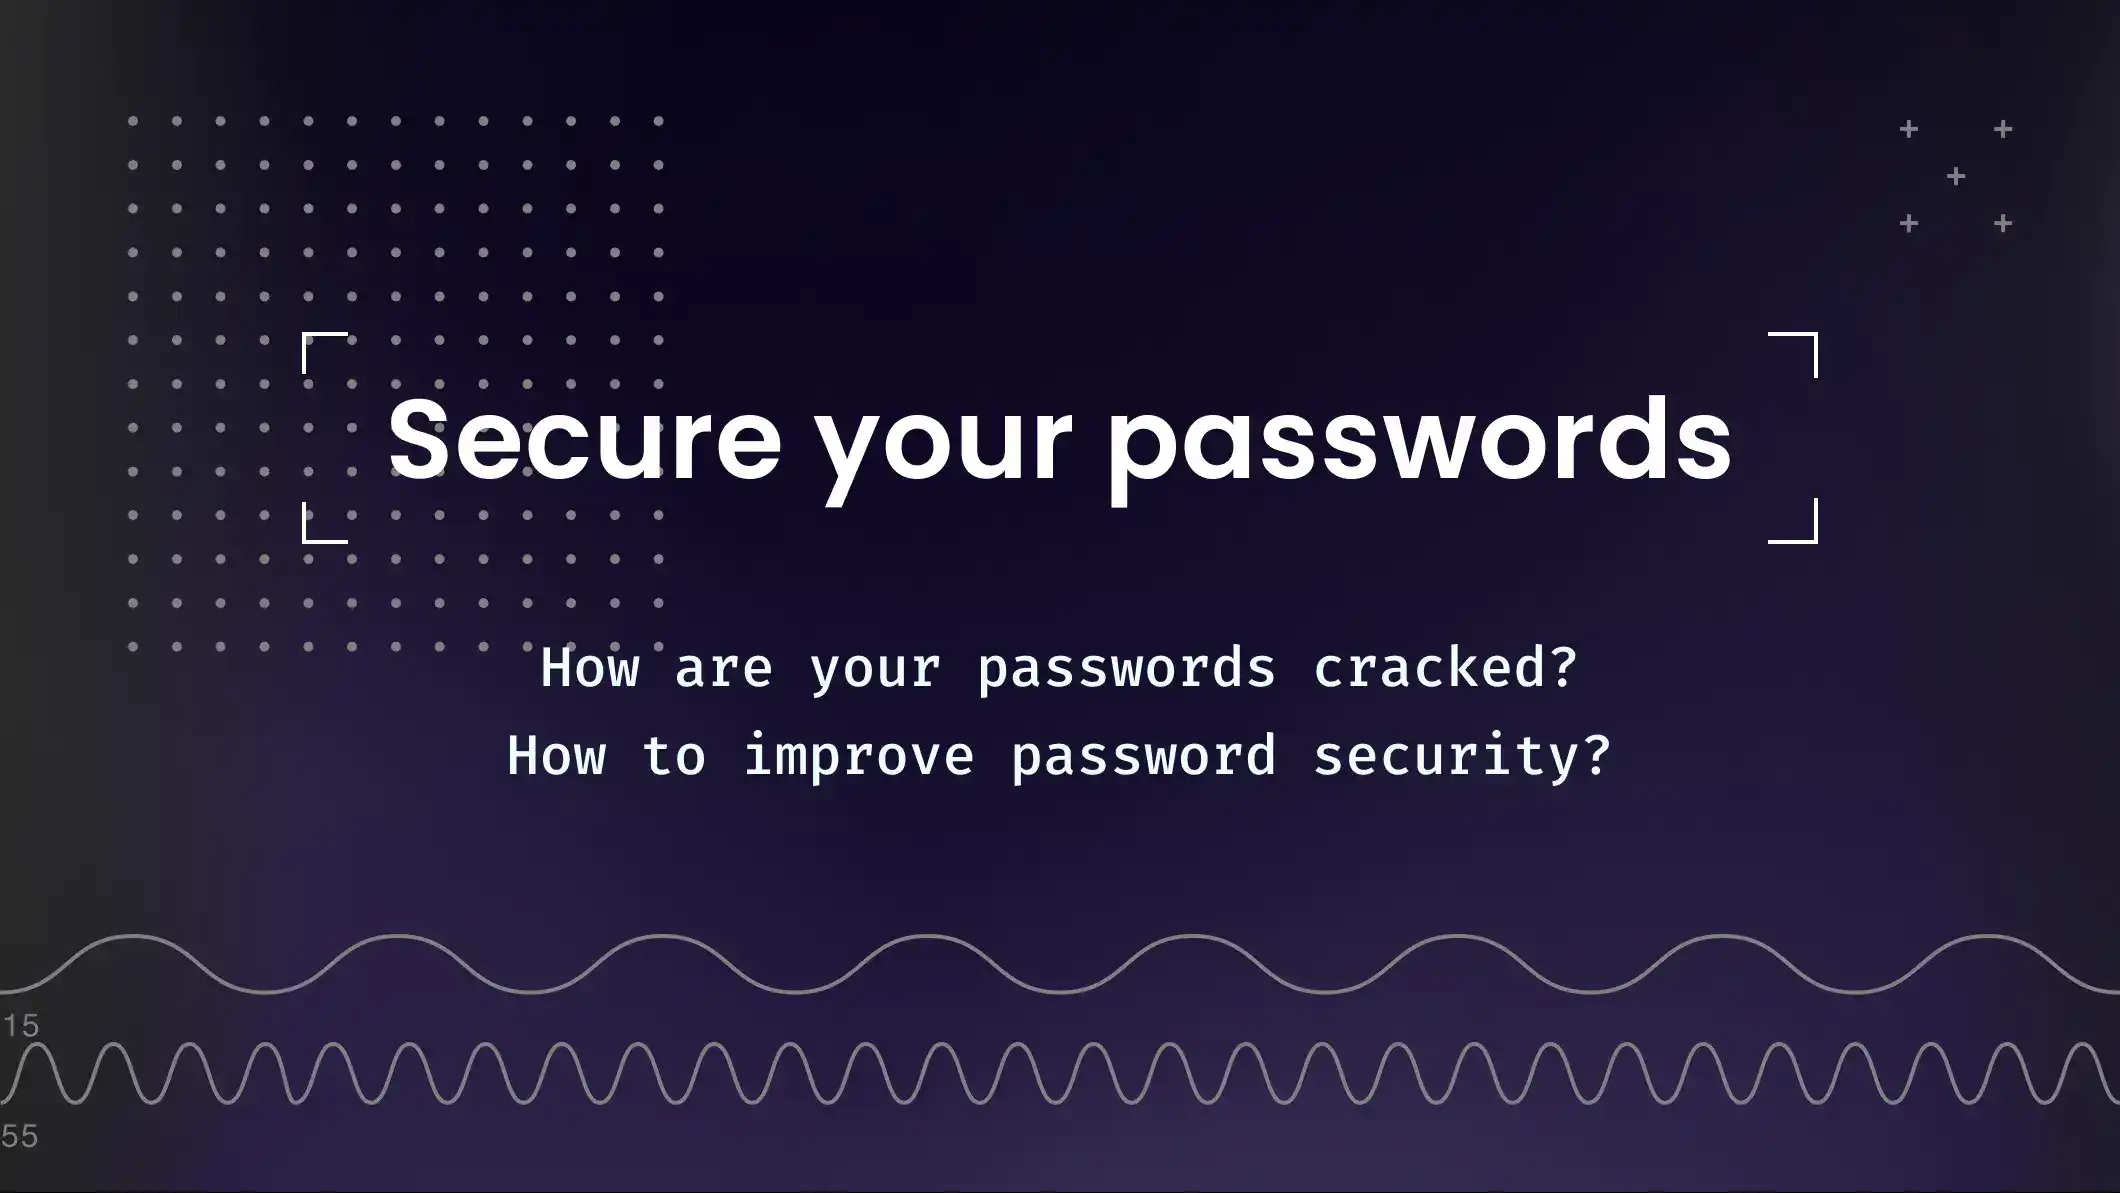 How are your passwords cracked? How to improve password security?